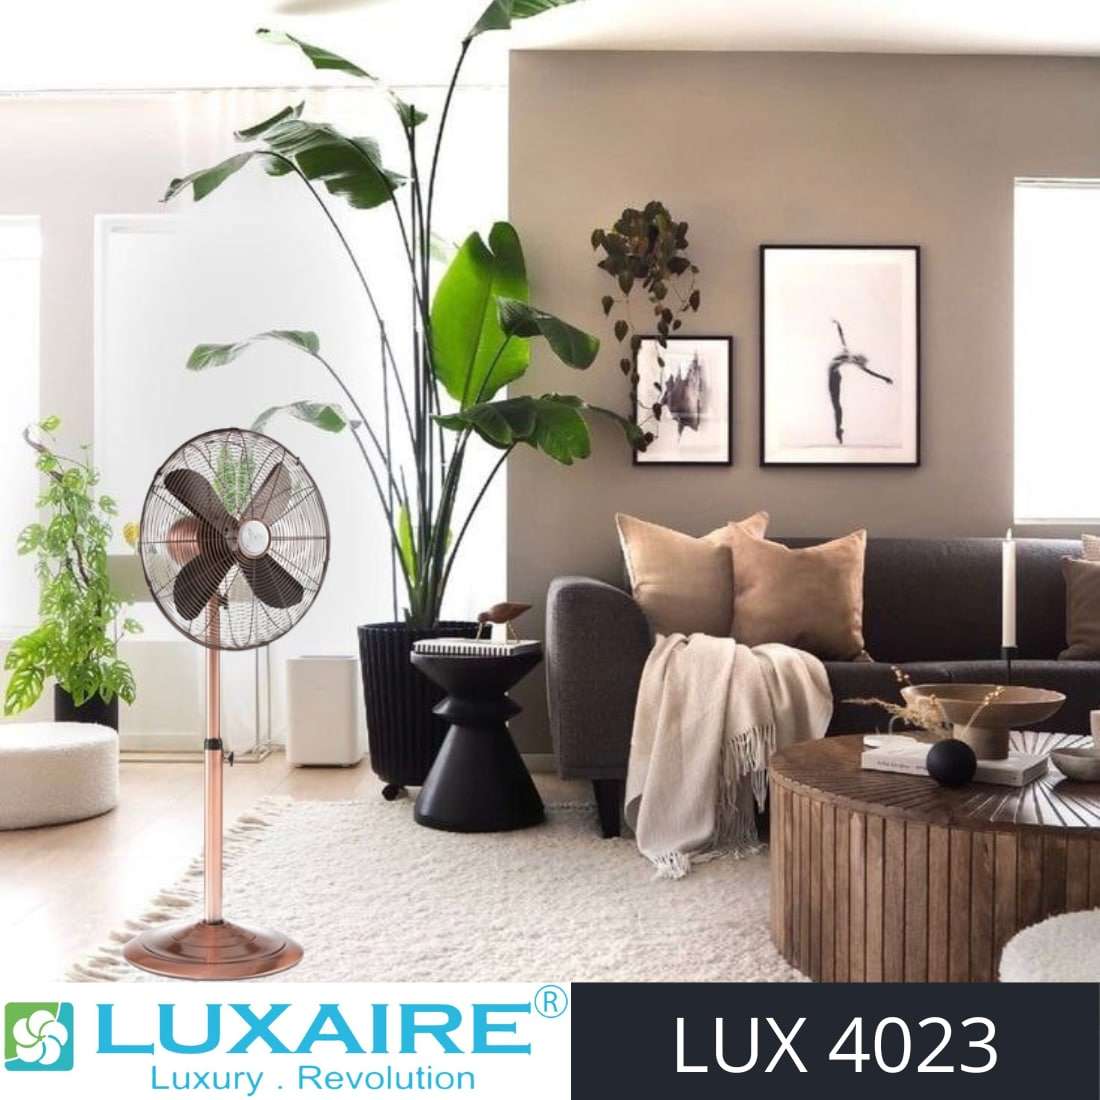 LUX 4023